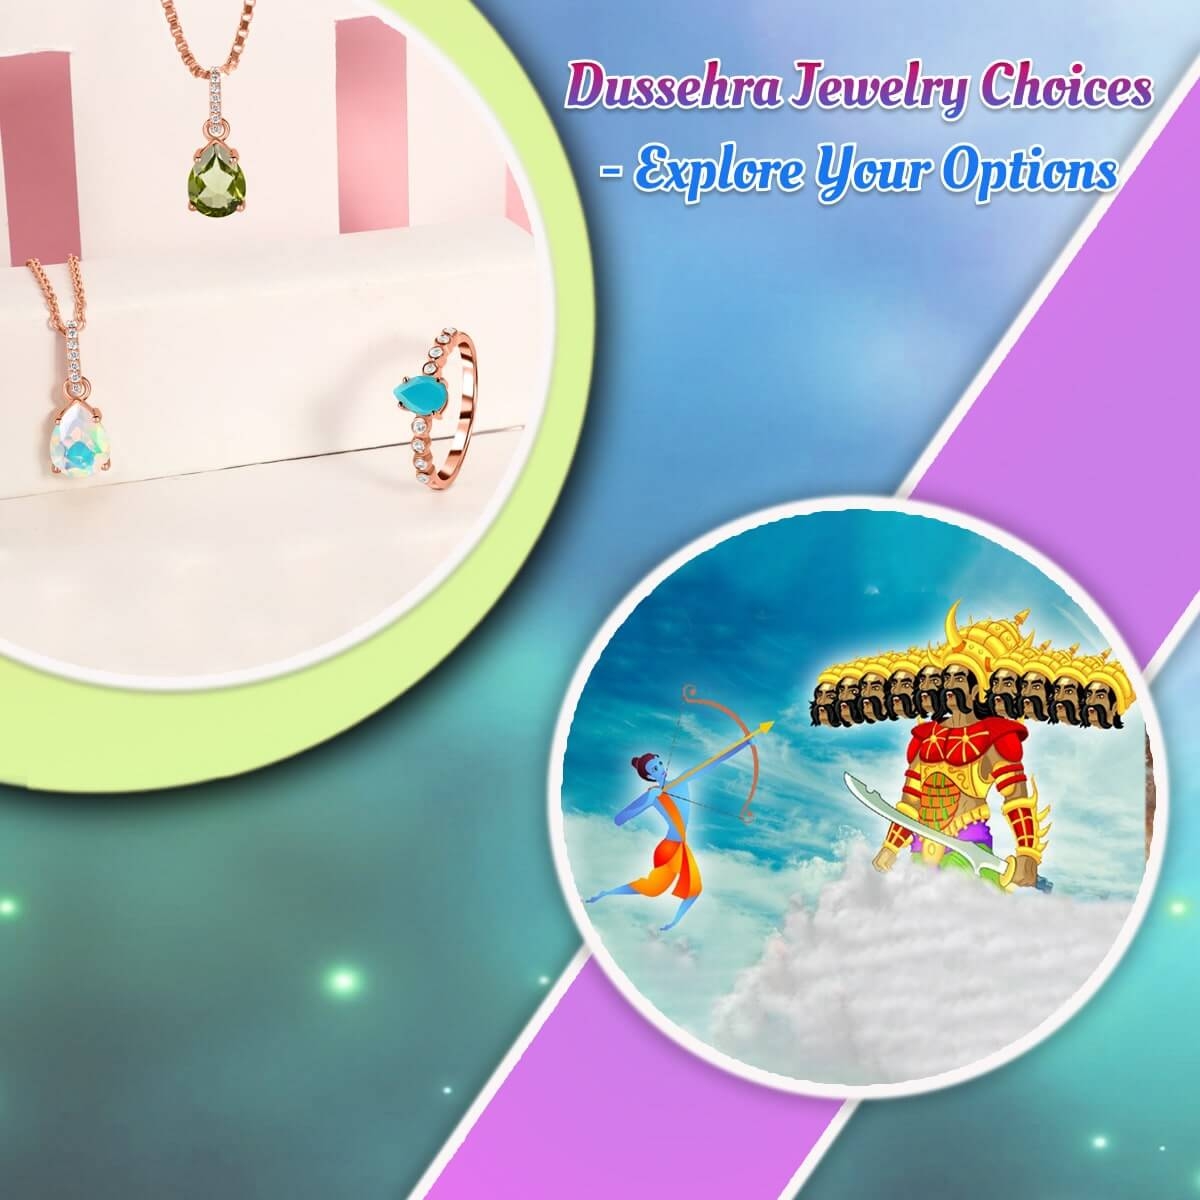 Categories of Jewelry You Should Opt for This Dussehra